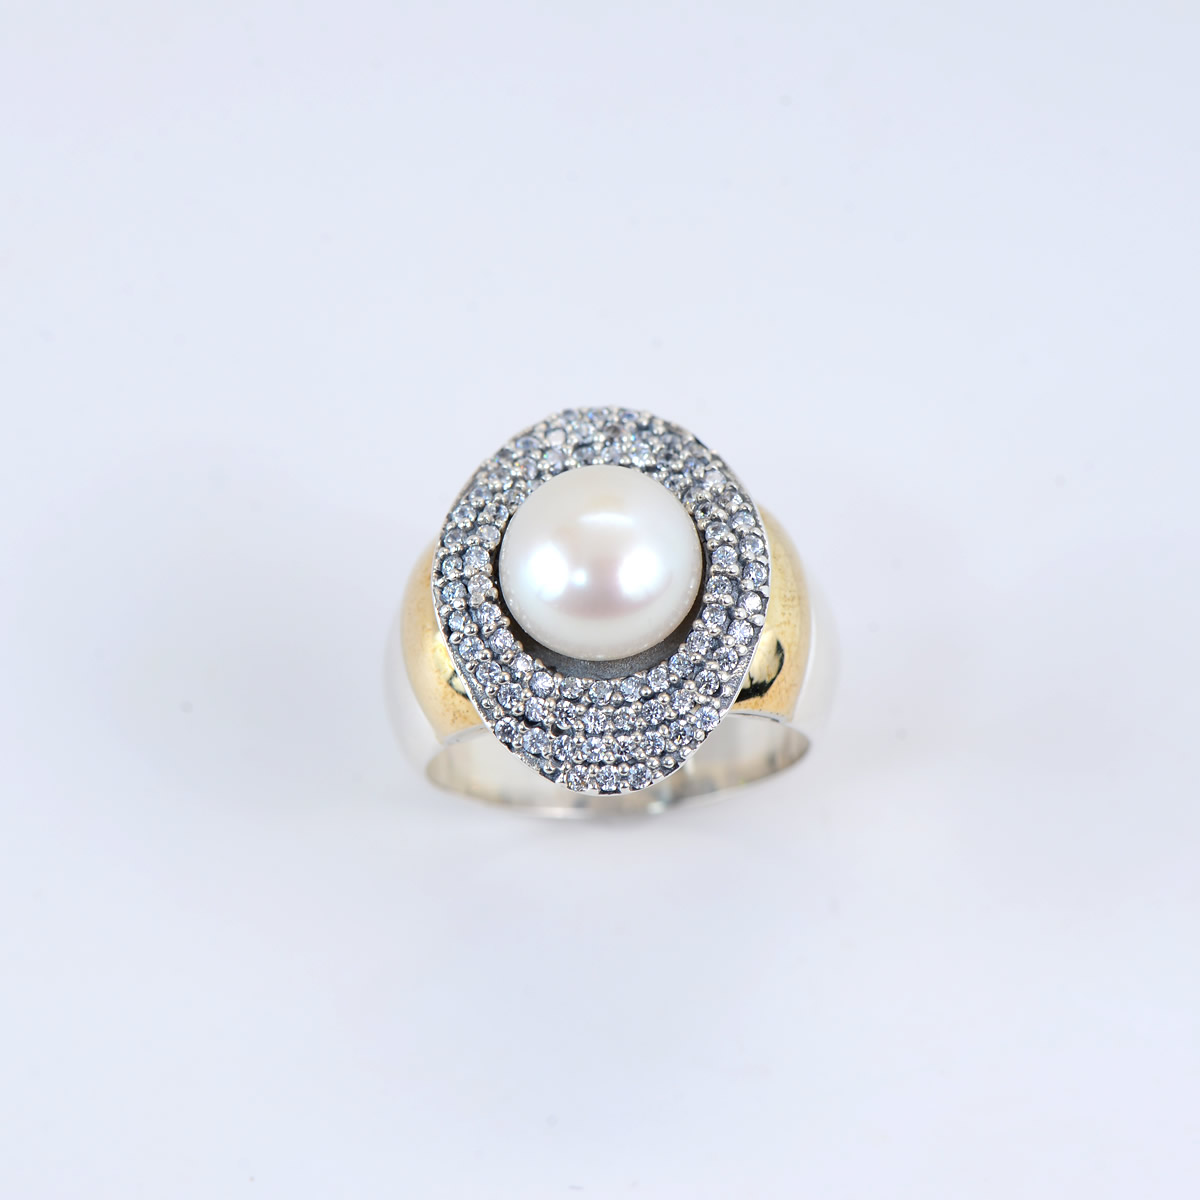 Elegant sterling Silver 9.25 and goldtone Plating ring with fresh water pearl